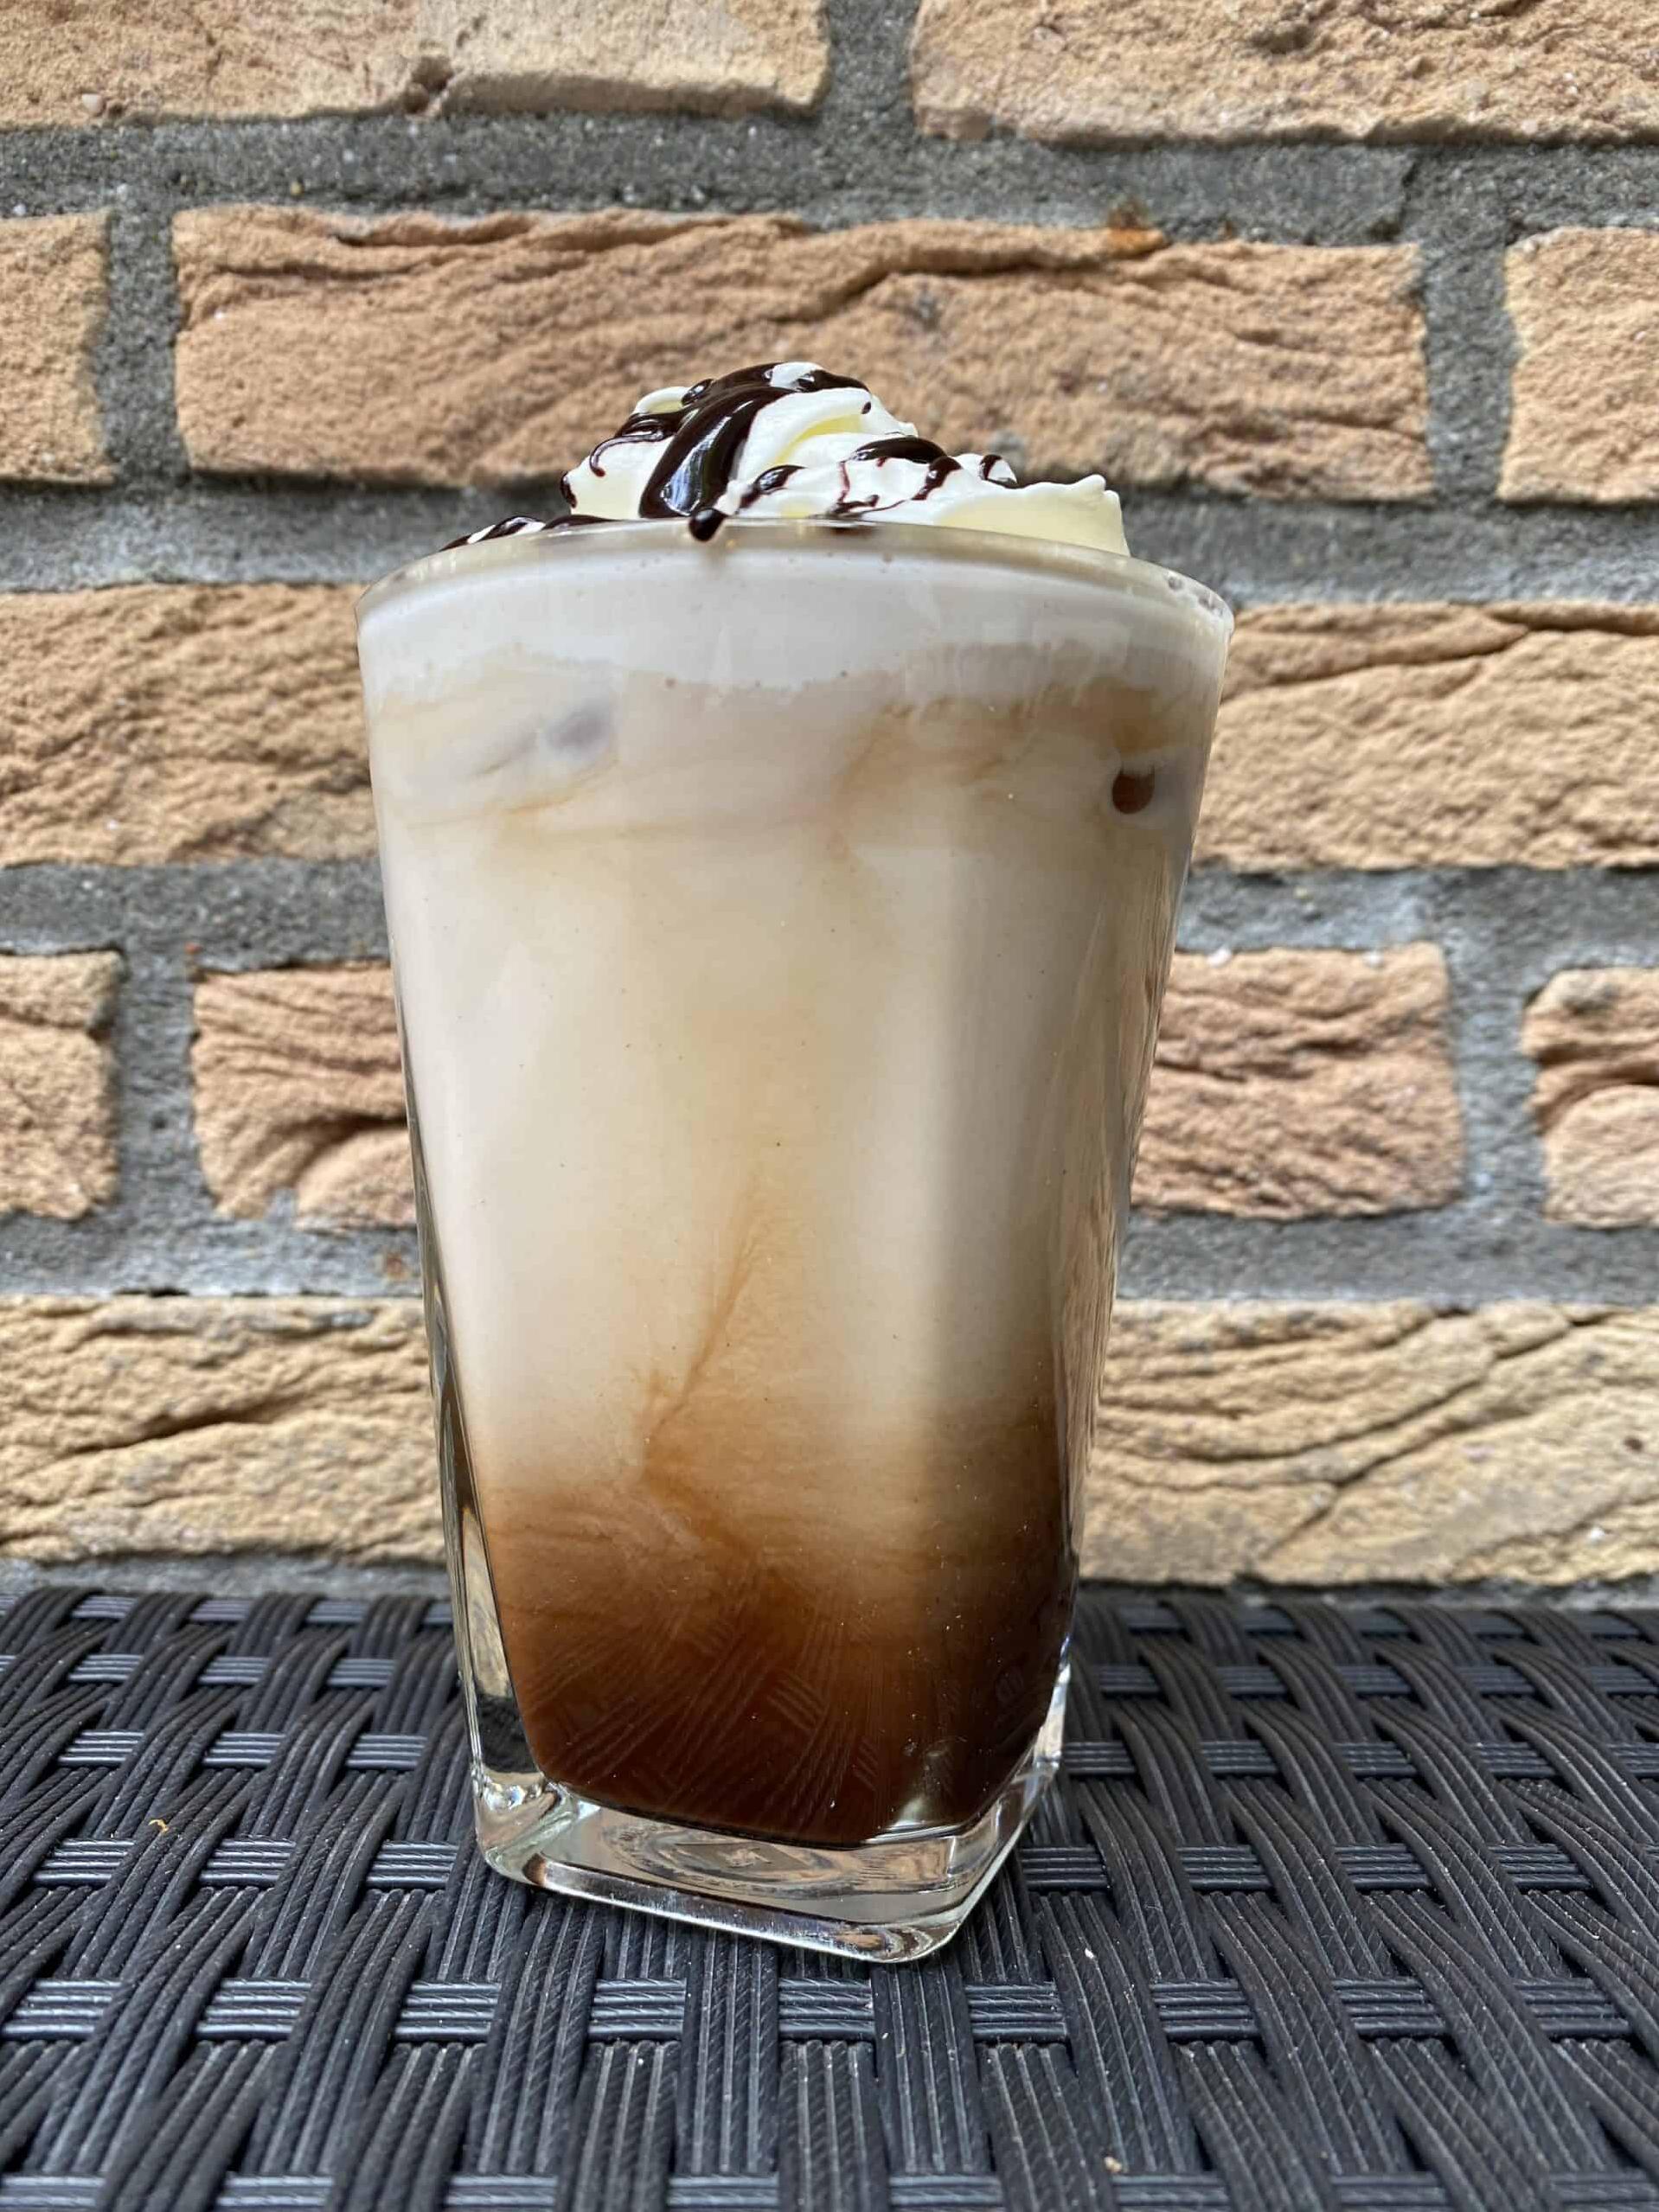  Our iced mocha latte is the perfect pick-me-up on a hot day.